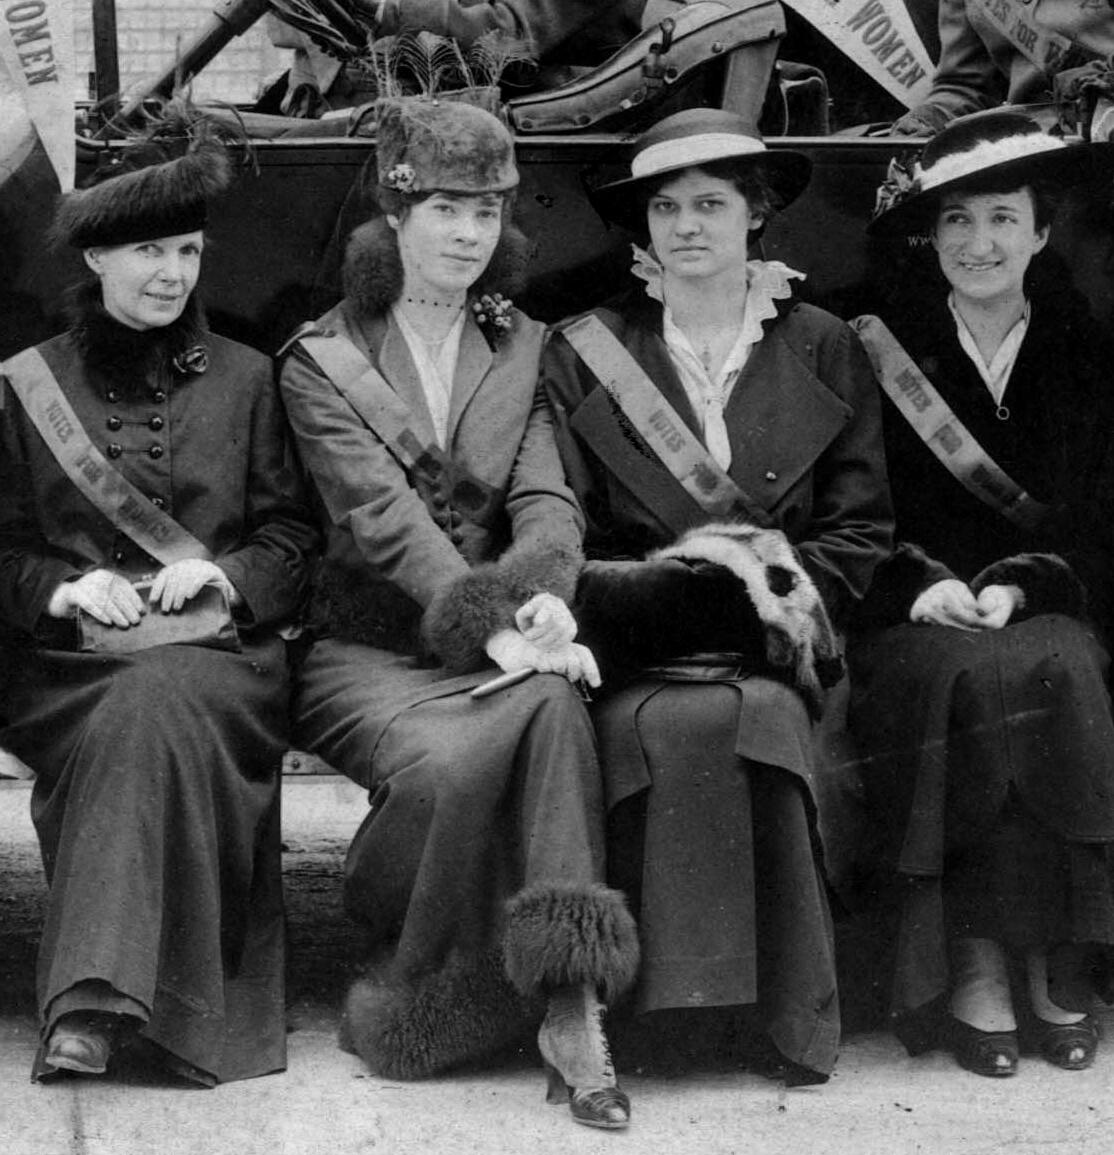 A detailed photo of the members of the Equal Suffrage League shows four of the members.